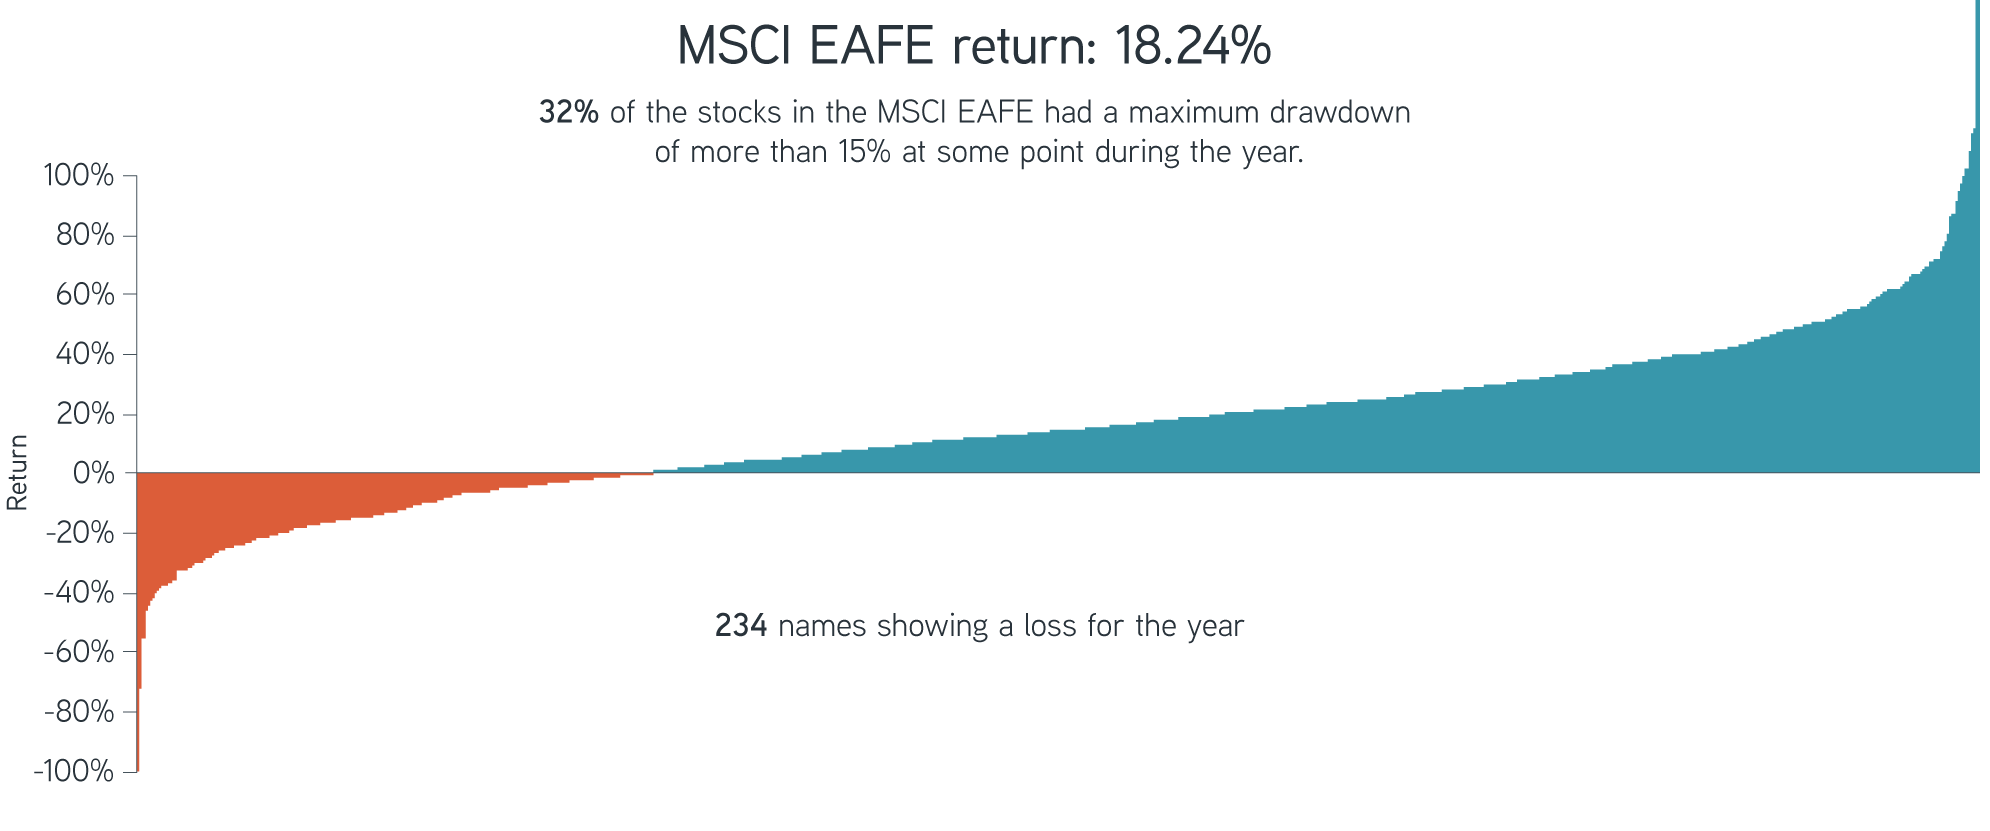 32% of the stocks in the MSCI EAFE had a maximum drawdown of more than 15% at some point in during the year.